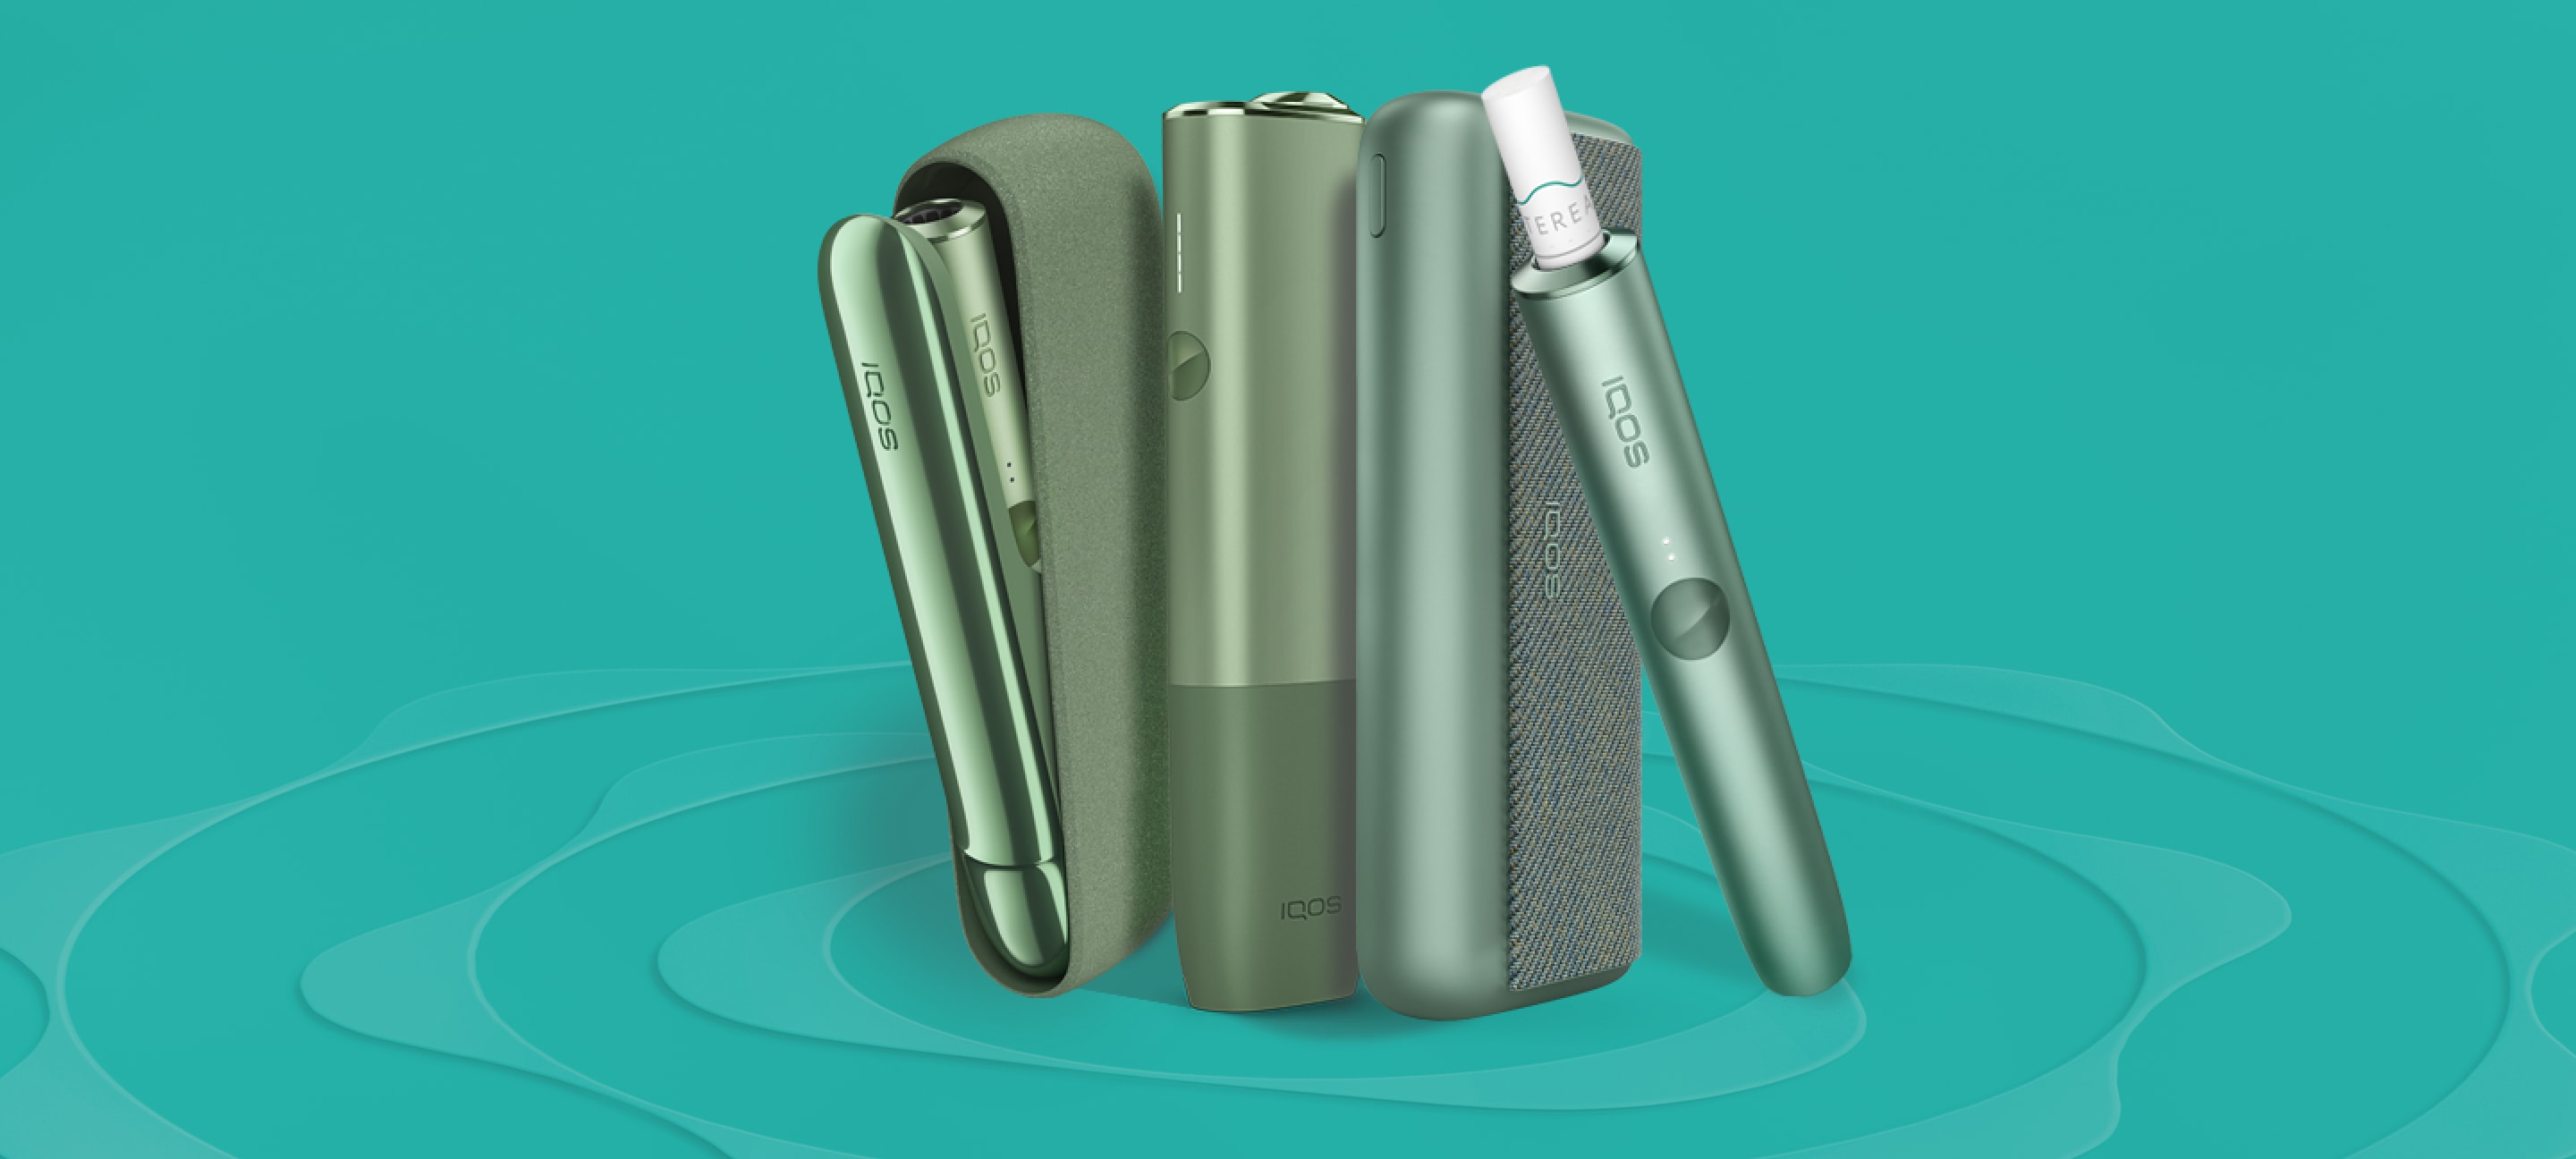 Discover IQOS ILUMA - the new heated tobacco devices | IQOS